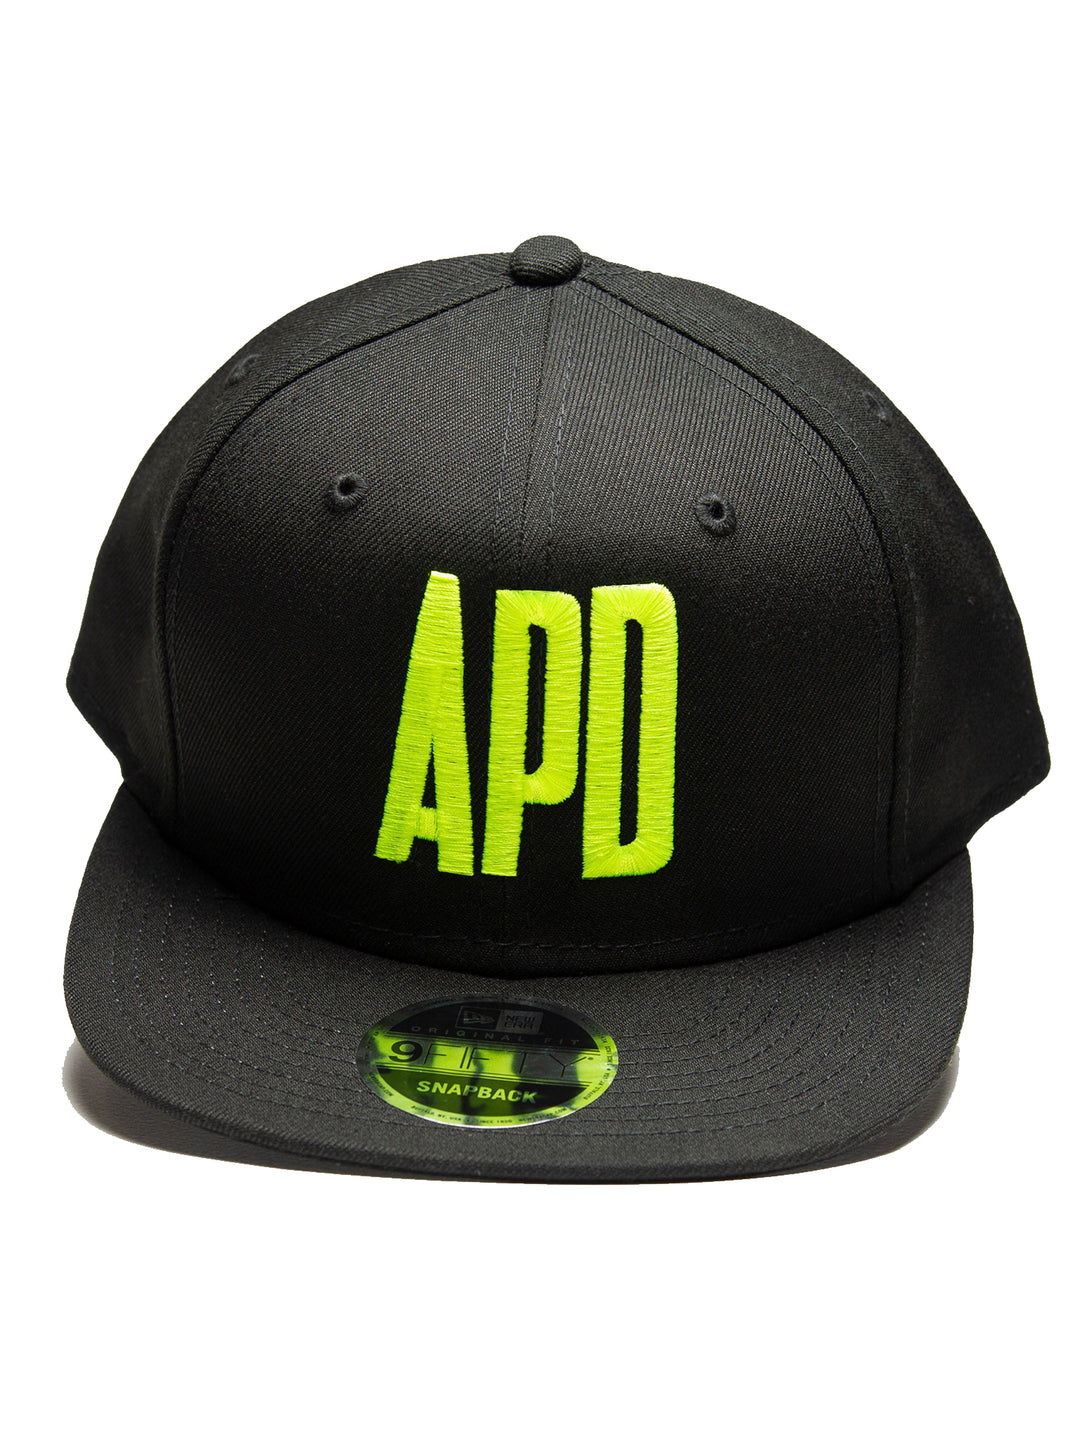 New Era Snapback in Black with Neon Embroidered Logo